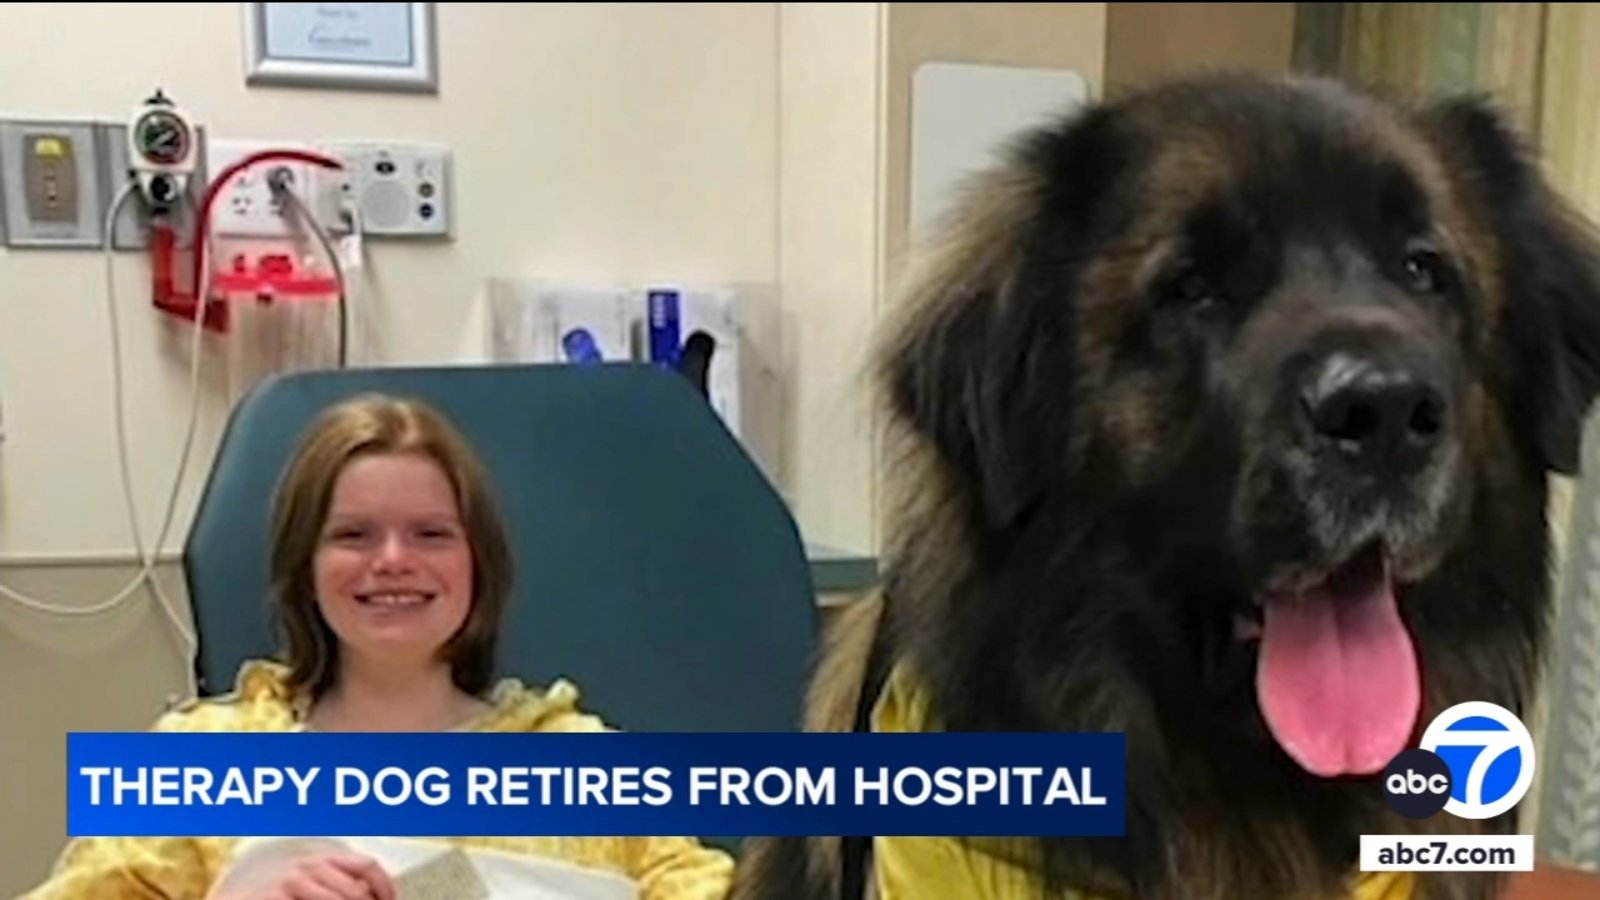 Maryland hospital honors Gryphon, beloved therapy dog retiring after 7 years of helping patients